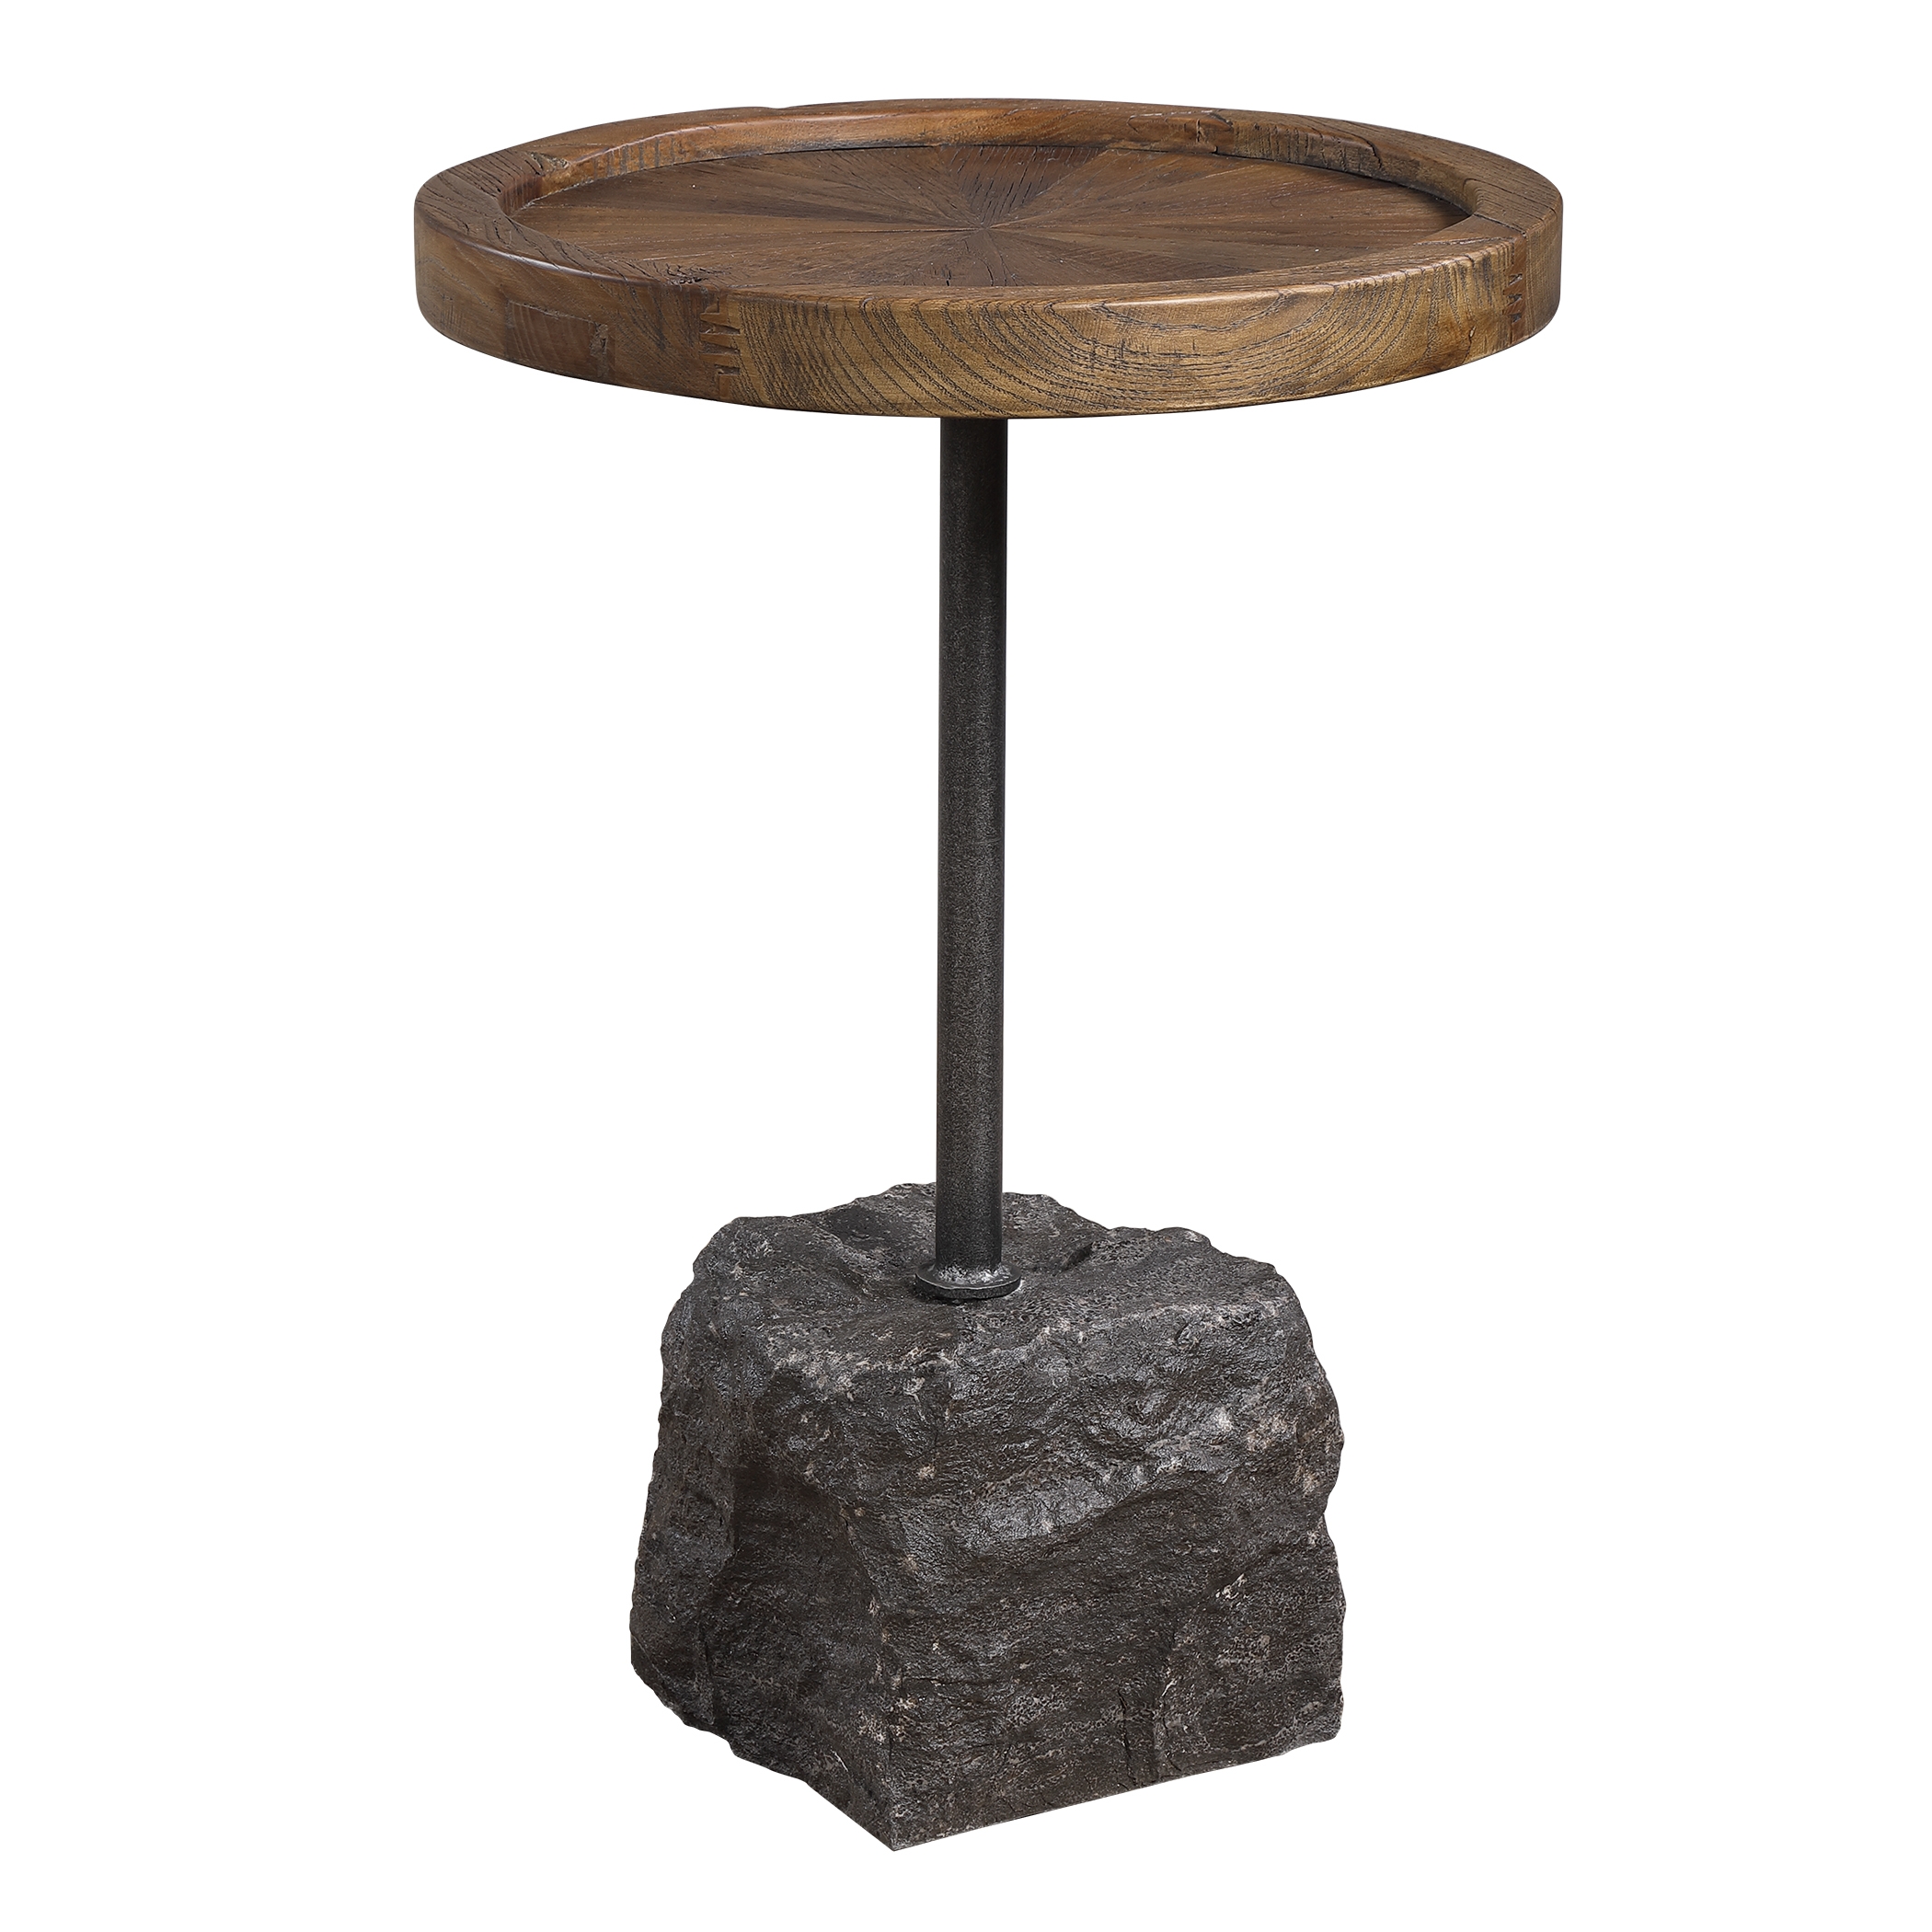 Horton Rustic Accent Table - Image 1